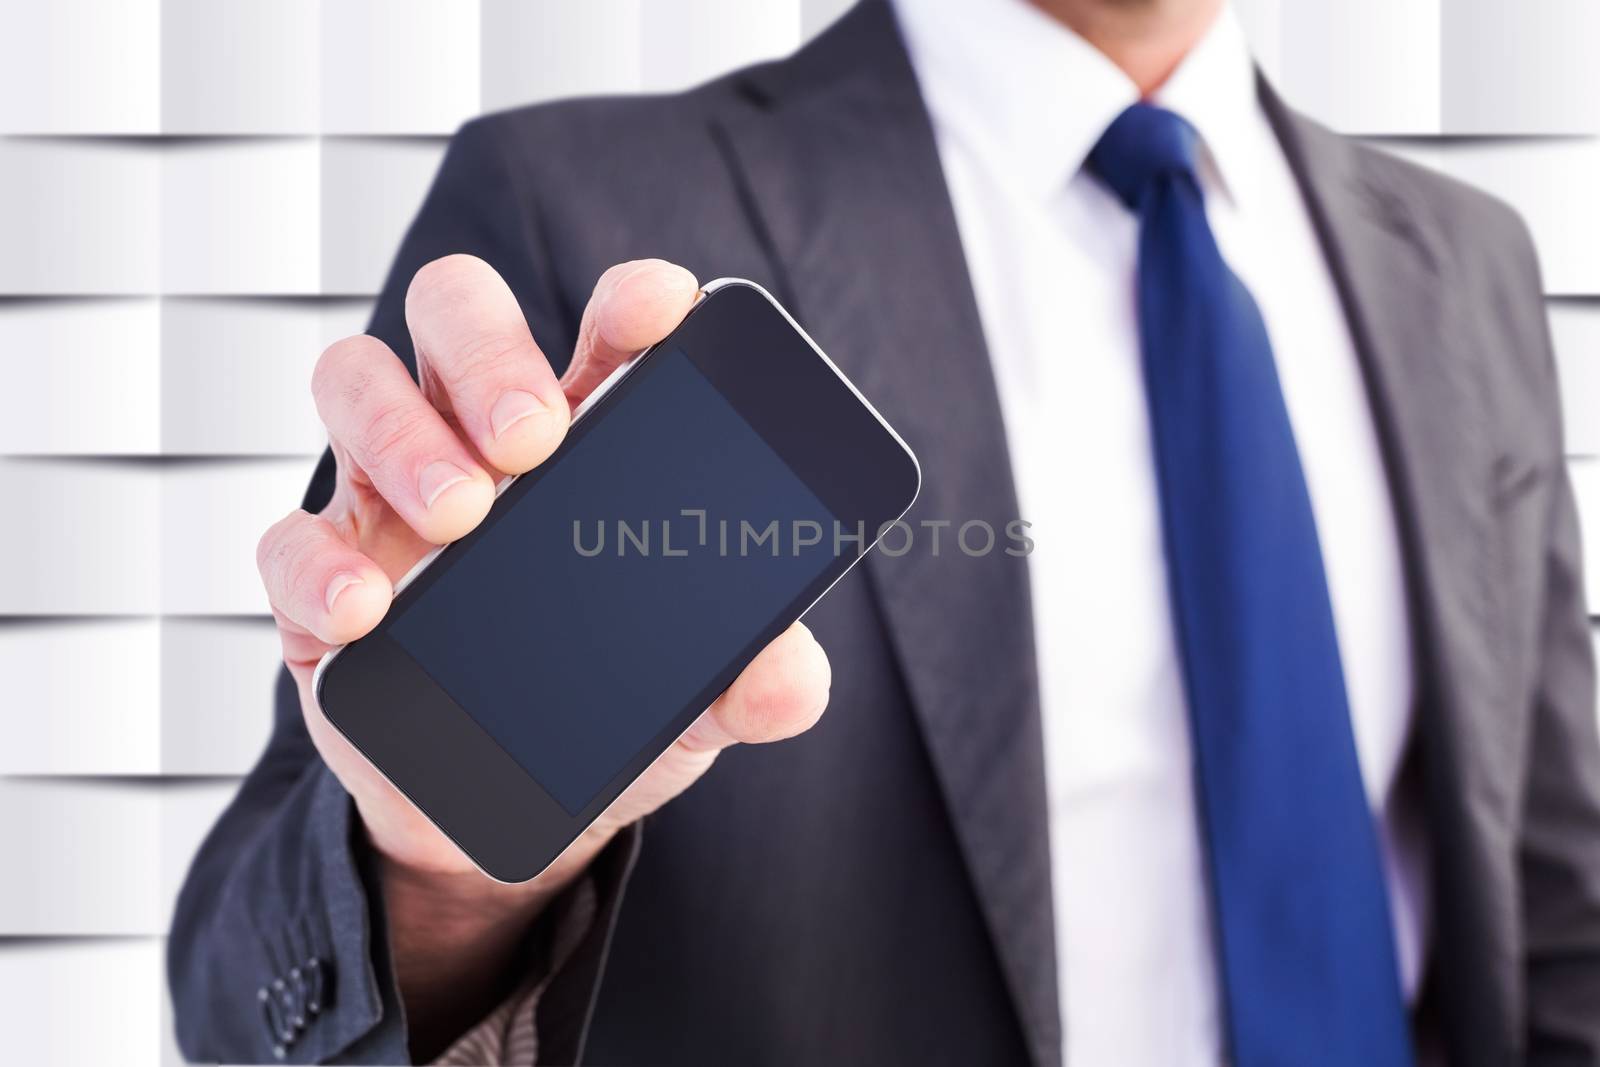 Composite image of businessman showing his smartphone screen by Wavebreakmedia